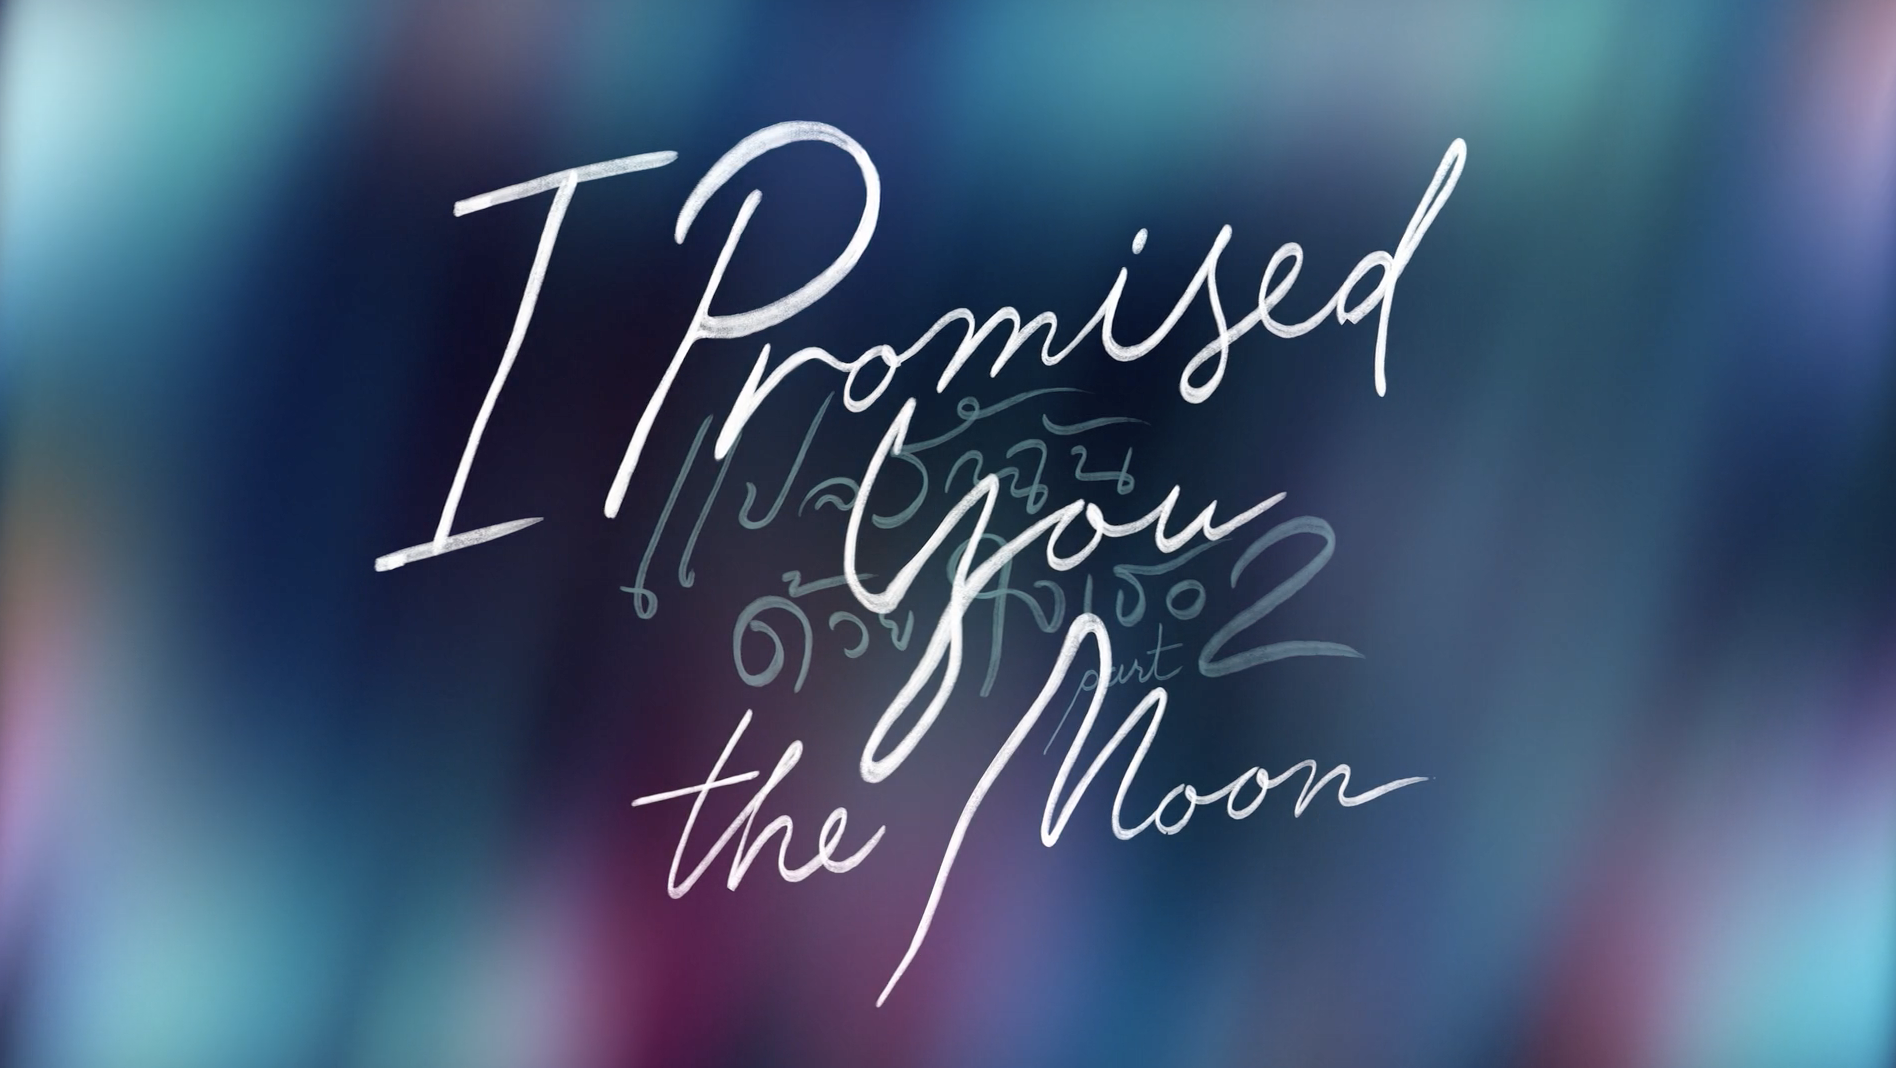 I promise you the moon